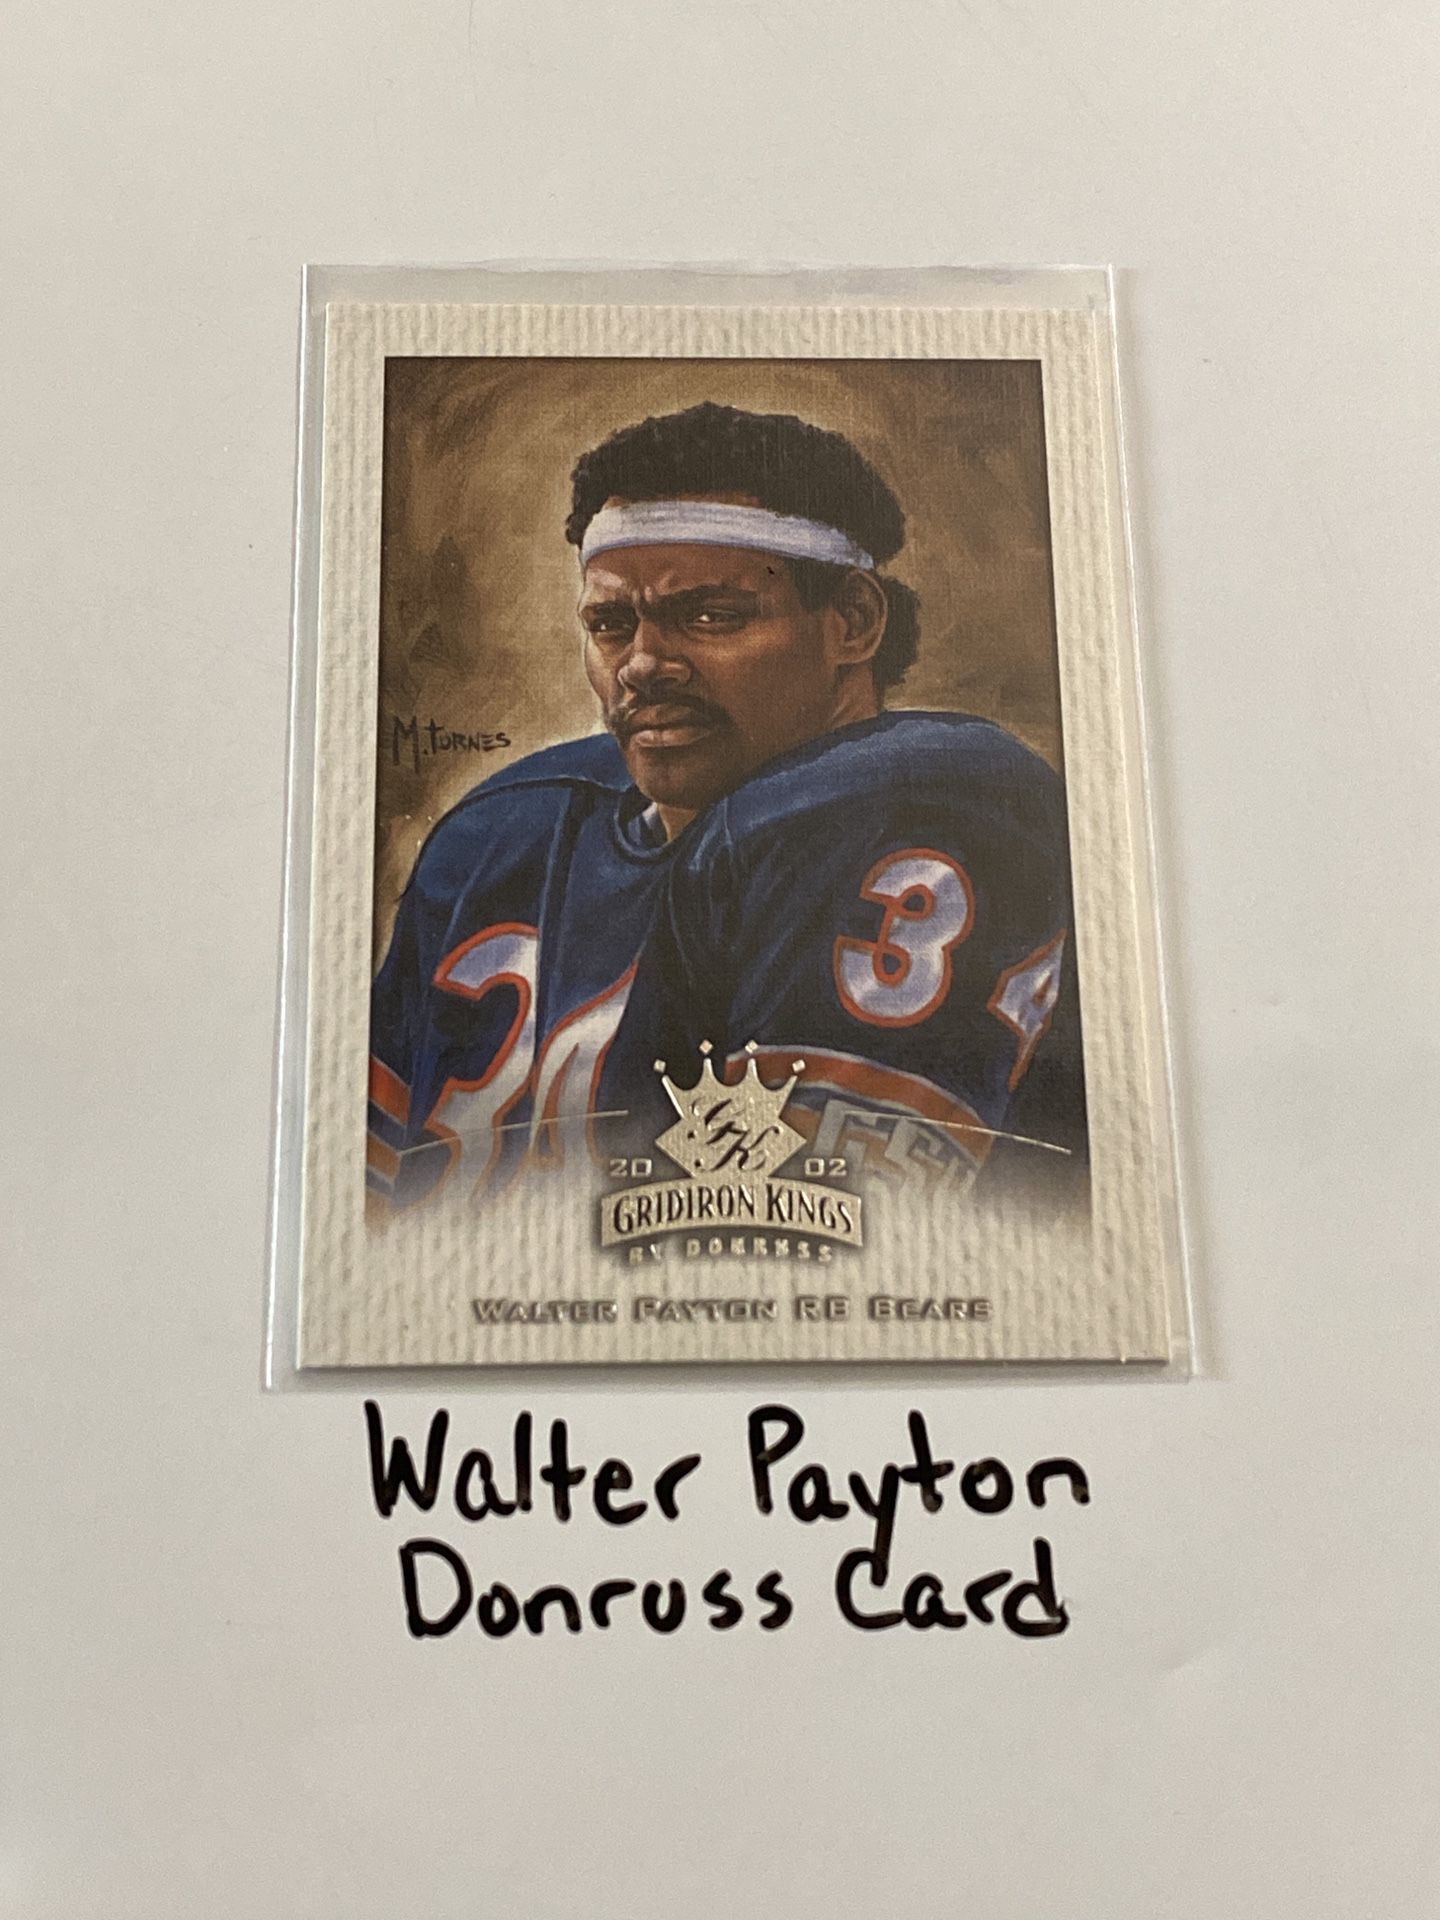 Walter Payton Chicago Bears Hall of Fame RB Donruss Card. 